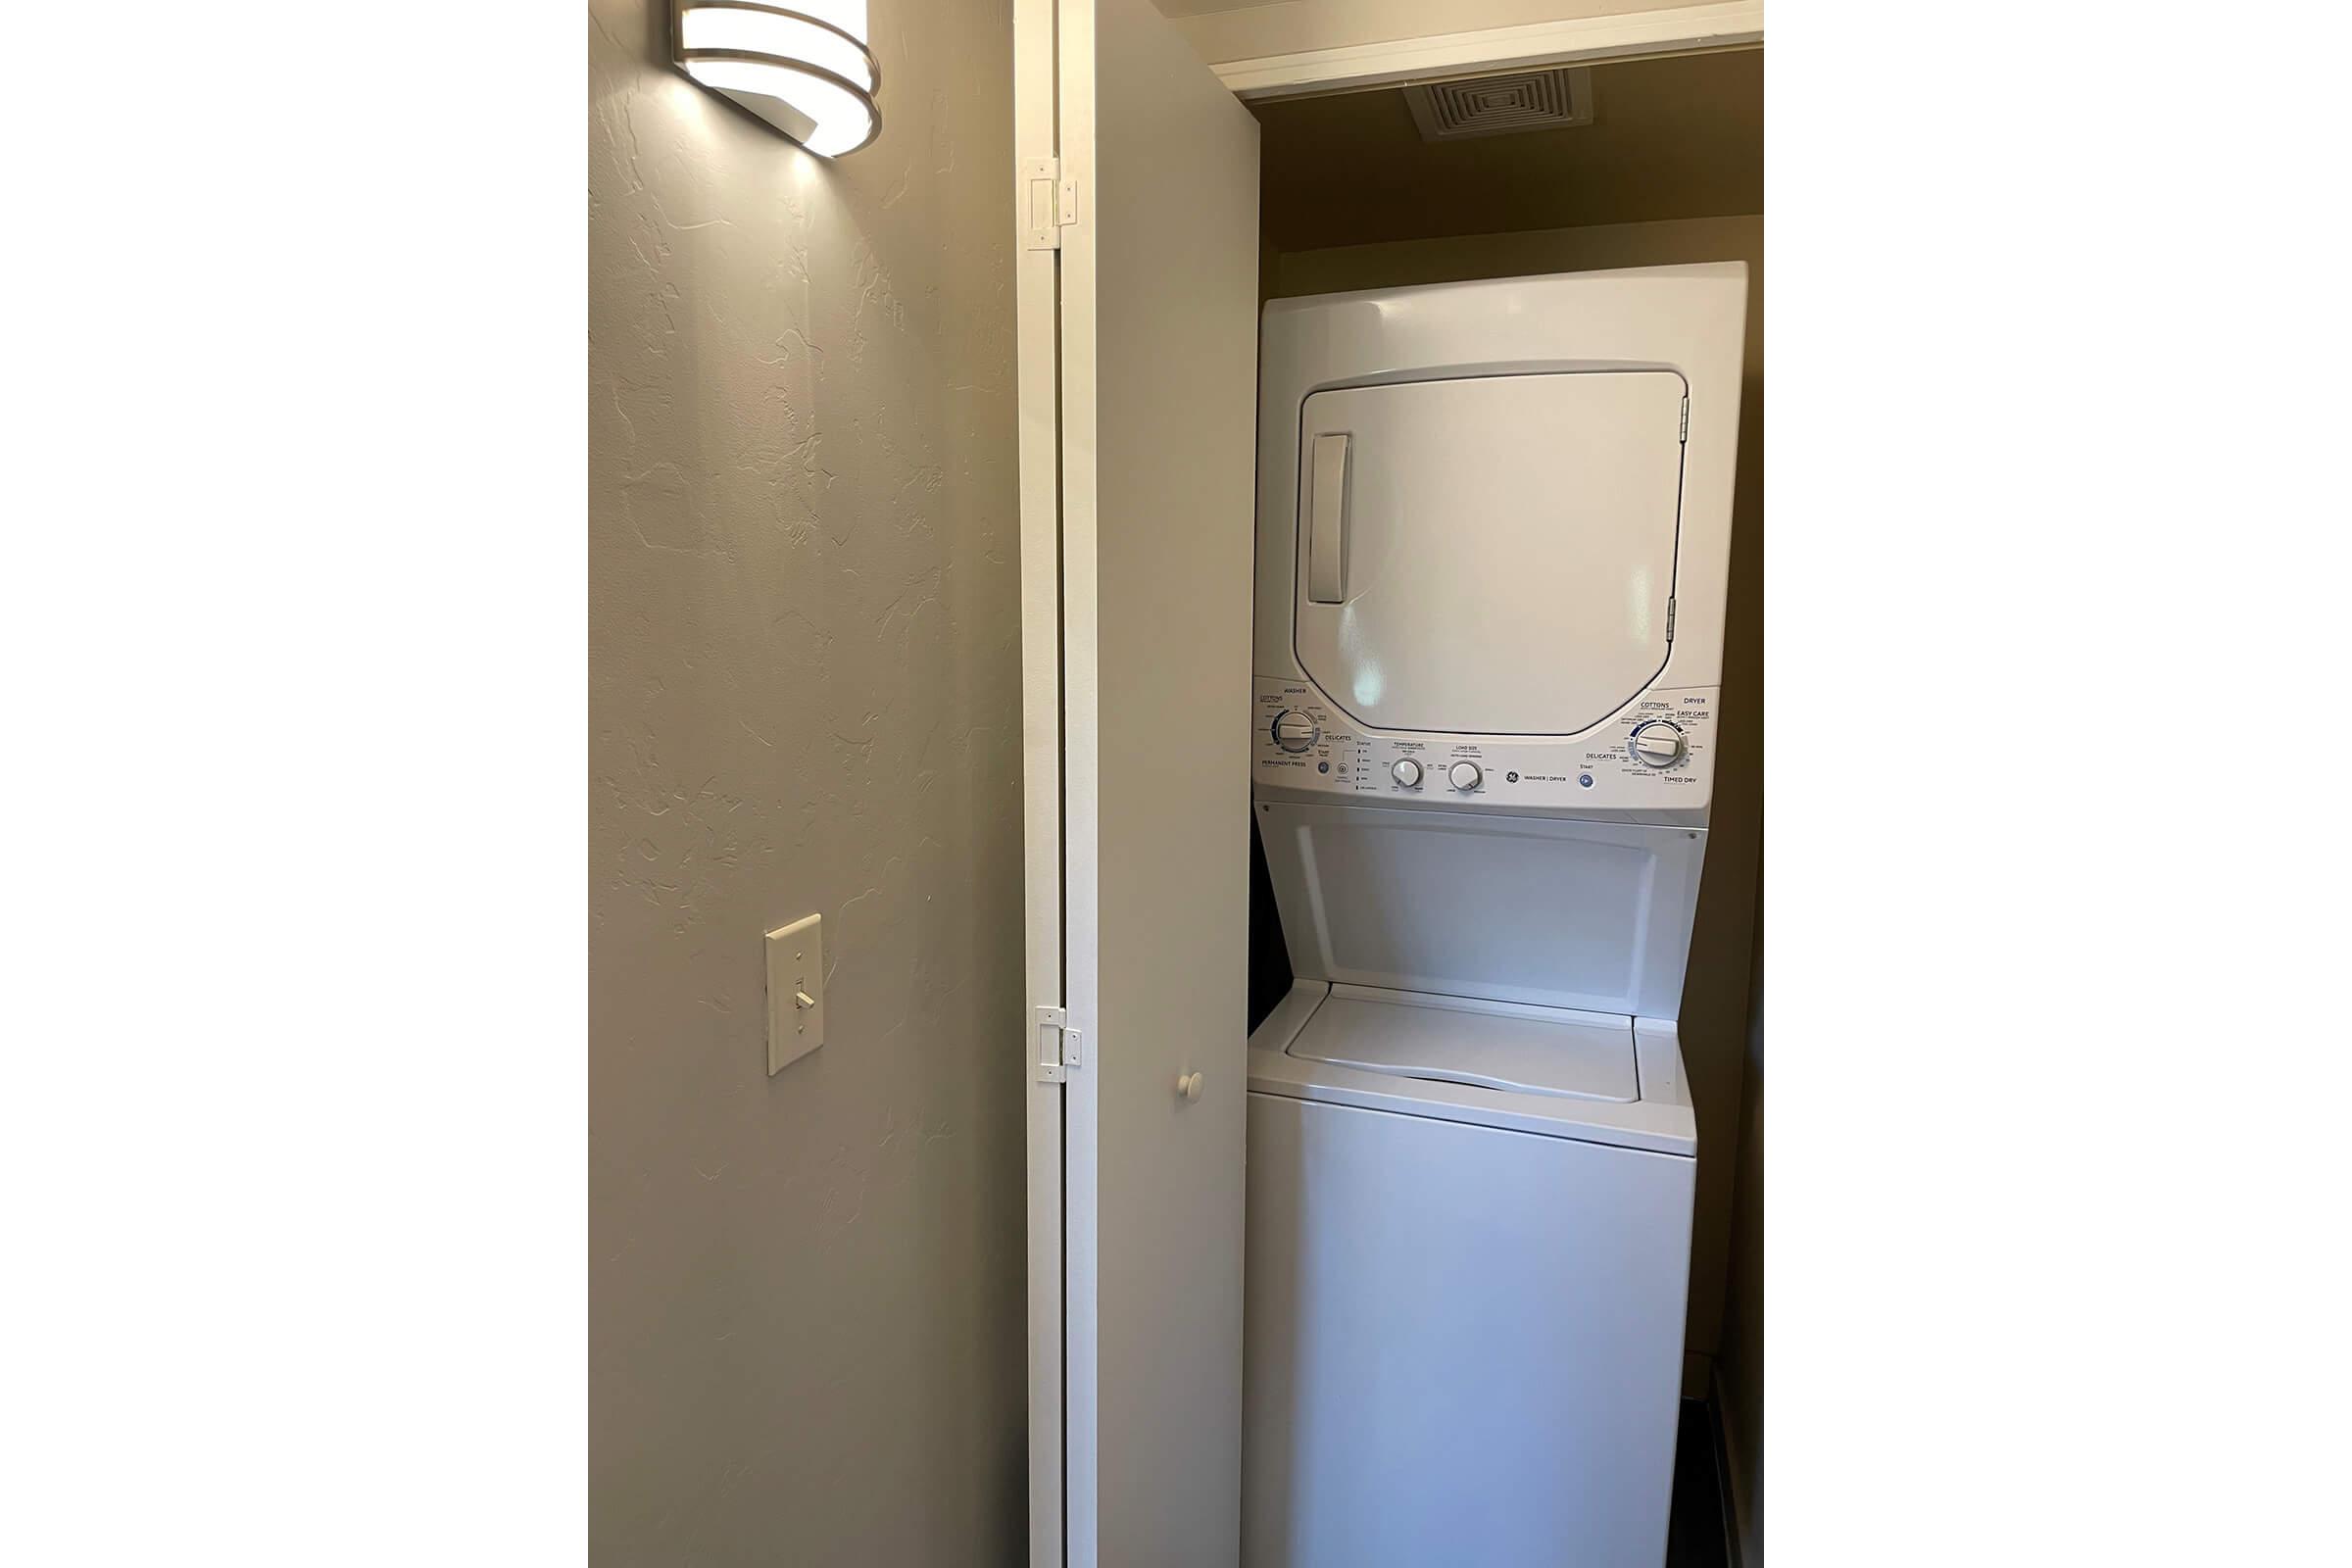 a refrigerator with the door open